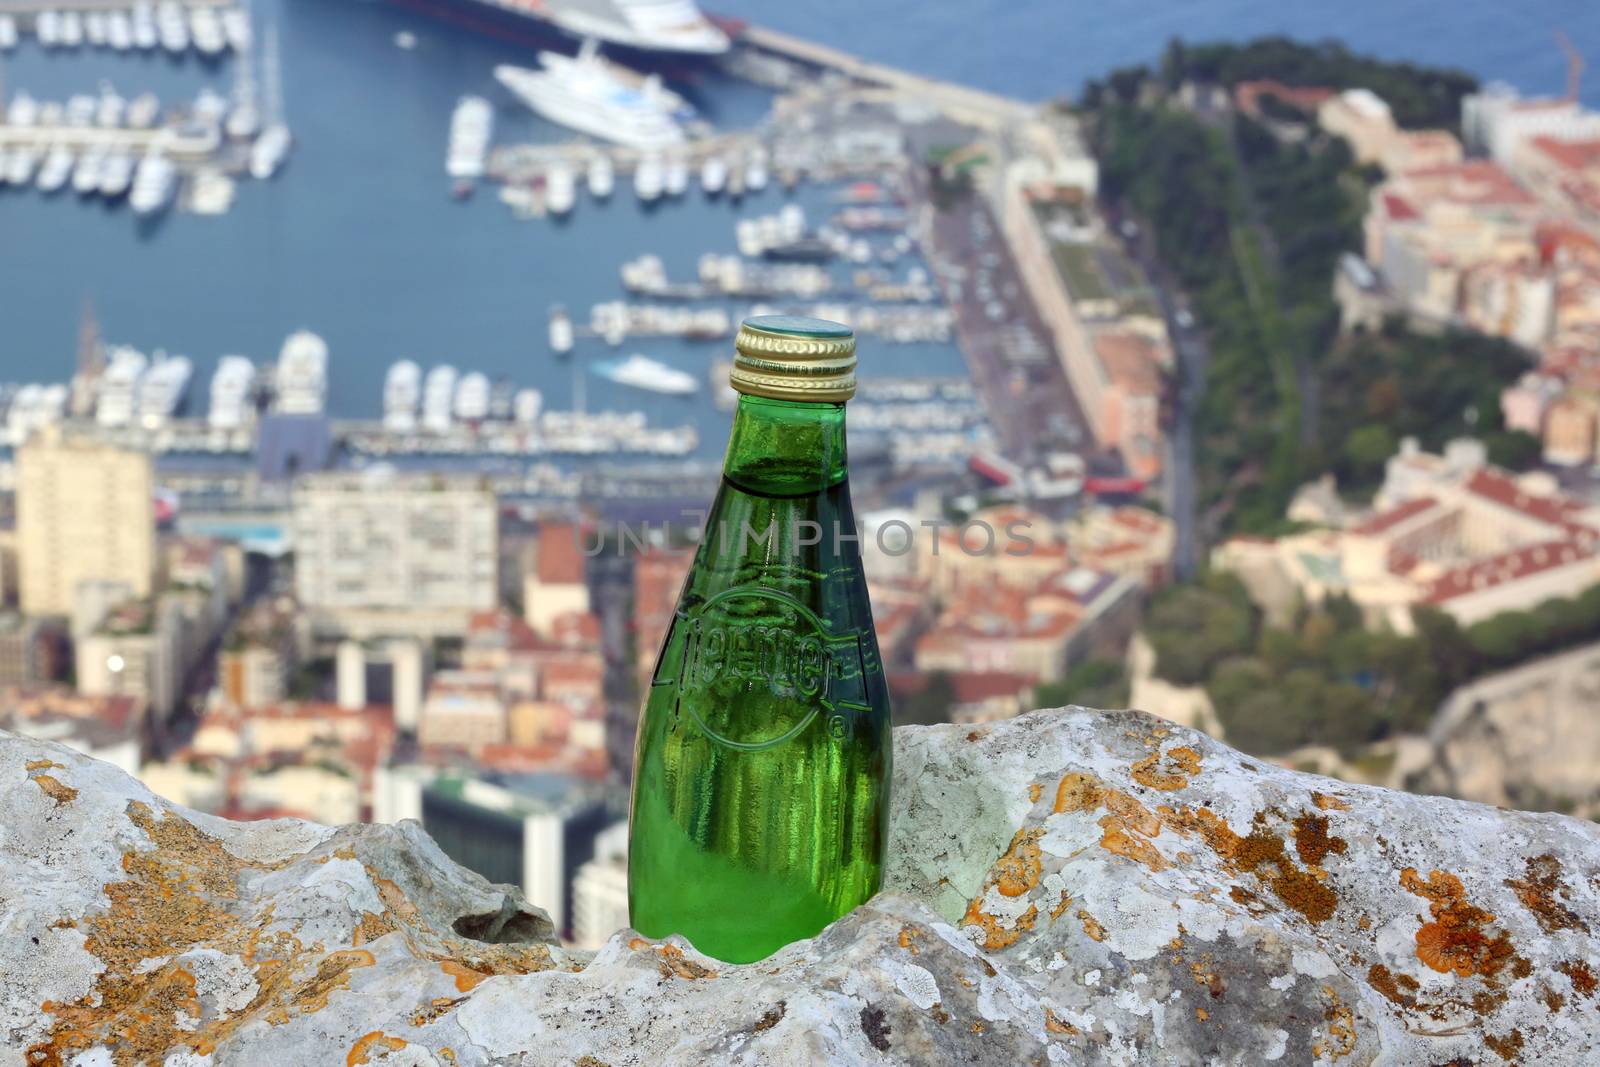 La Turbie, France - June 1, 2016: Perrier Sparkling Natural Mineral Water. Aerial View of the Port Hercule in Monaco in the Background
